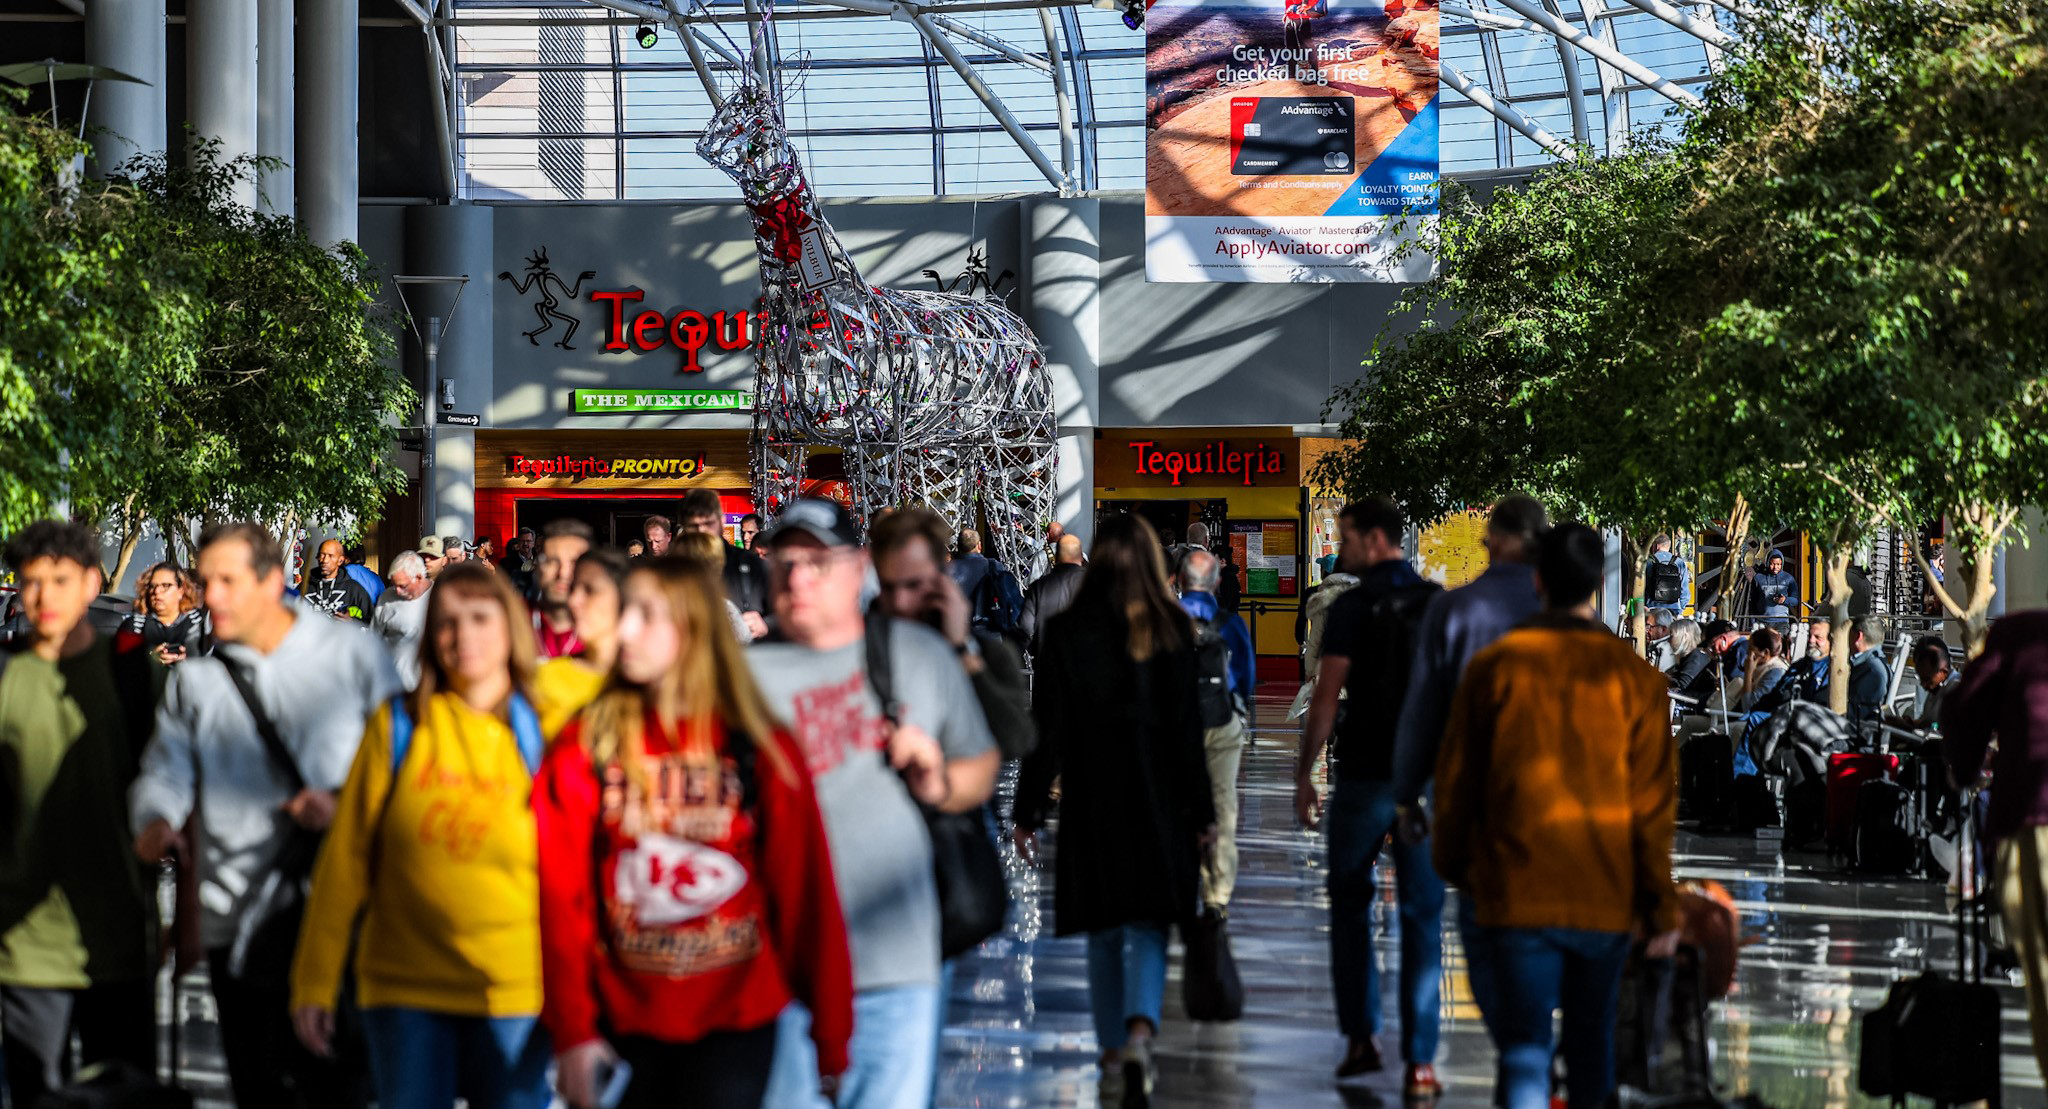 Passengers make their way through the Airport atrium where live trees line either side of the walkway. In the background is a large sculpture of a reindeer. 